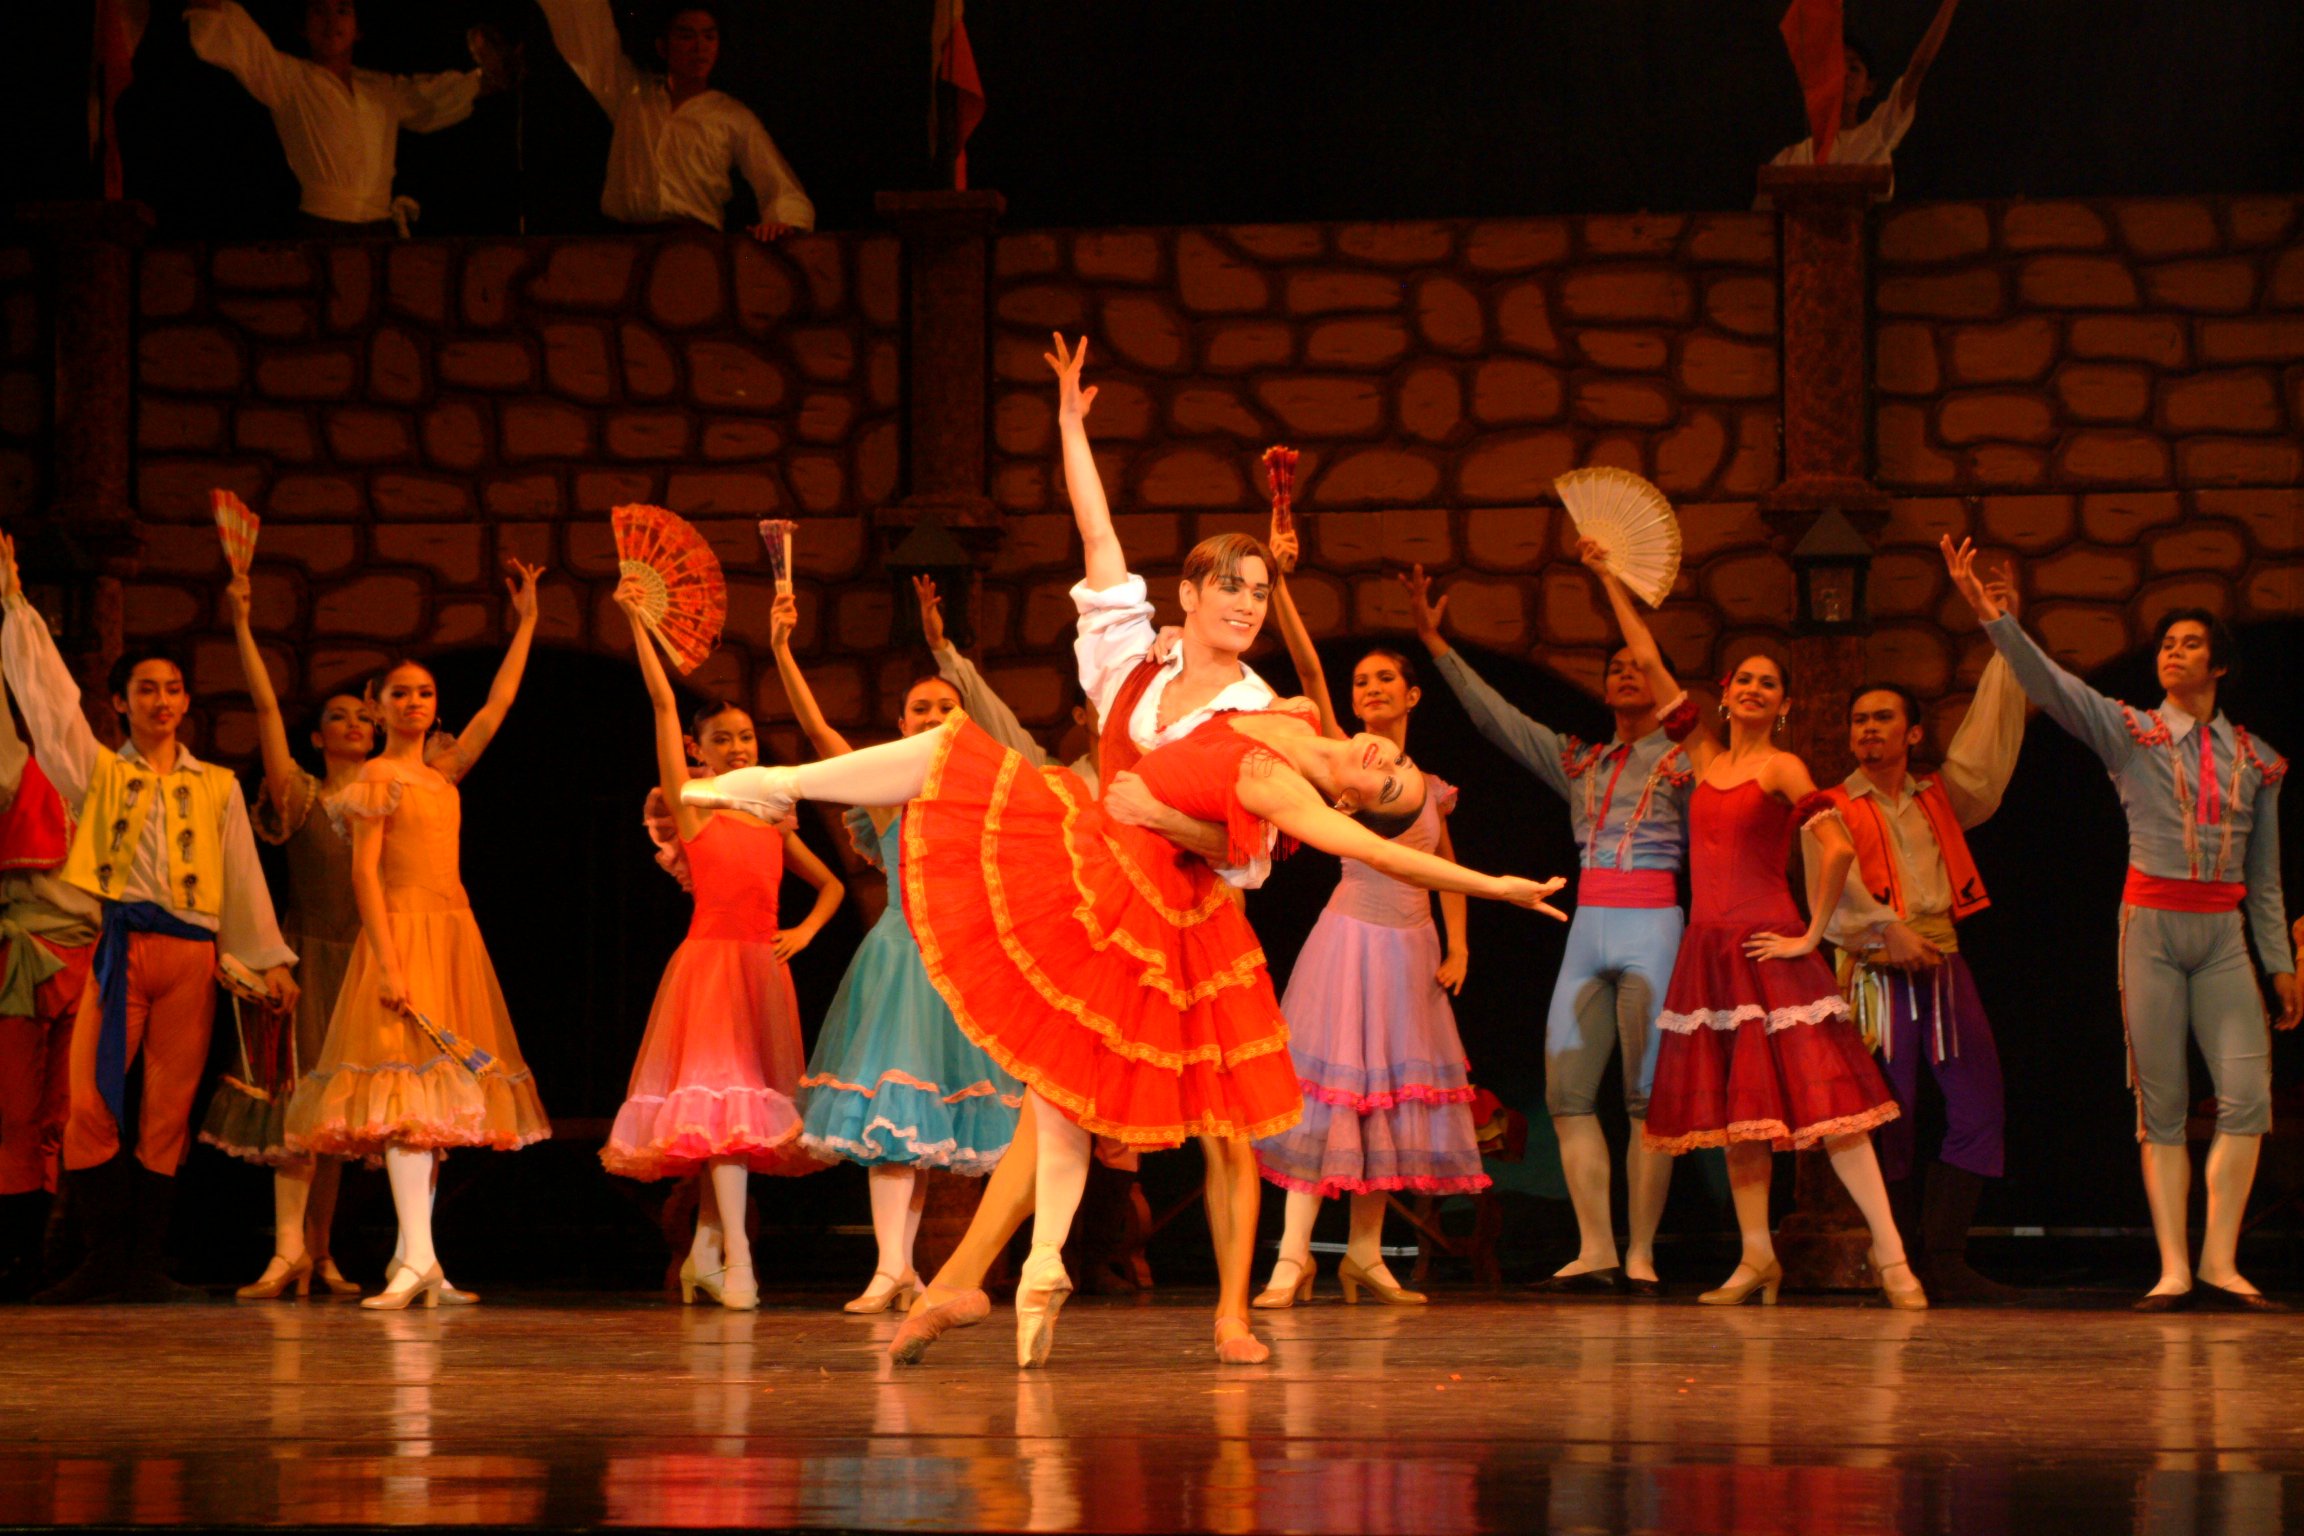    Dancing with Osias Barroso in one of Ballet Manila’s productions of  Don Quixote , 2004. “Kitri is a girl who epitomizes the French phrase ‘joie de vivre.’ She is in love with life and with Basilio, a poor barber.  Don Quixote &nbsp;is a fast brav